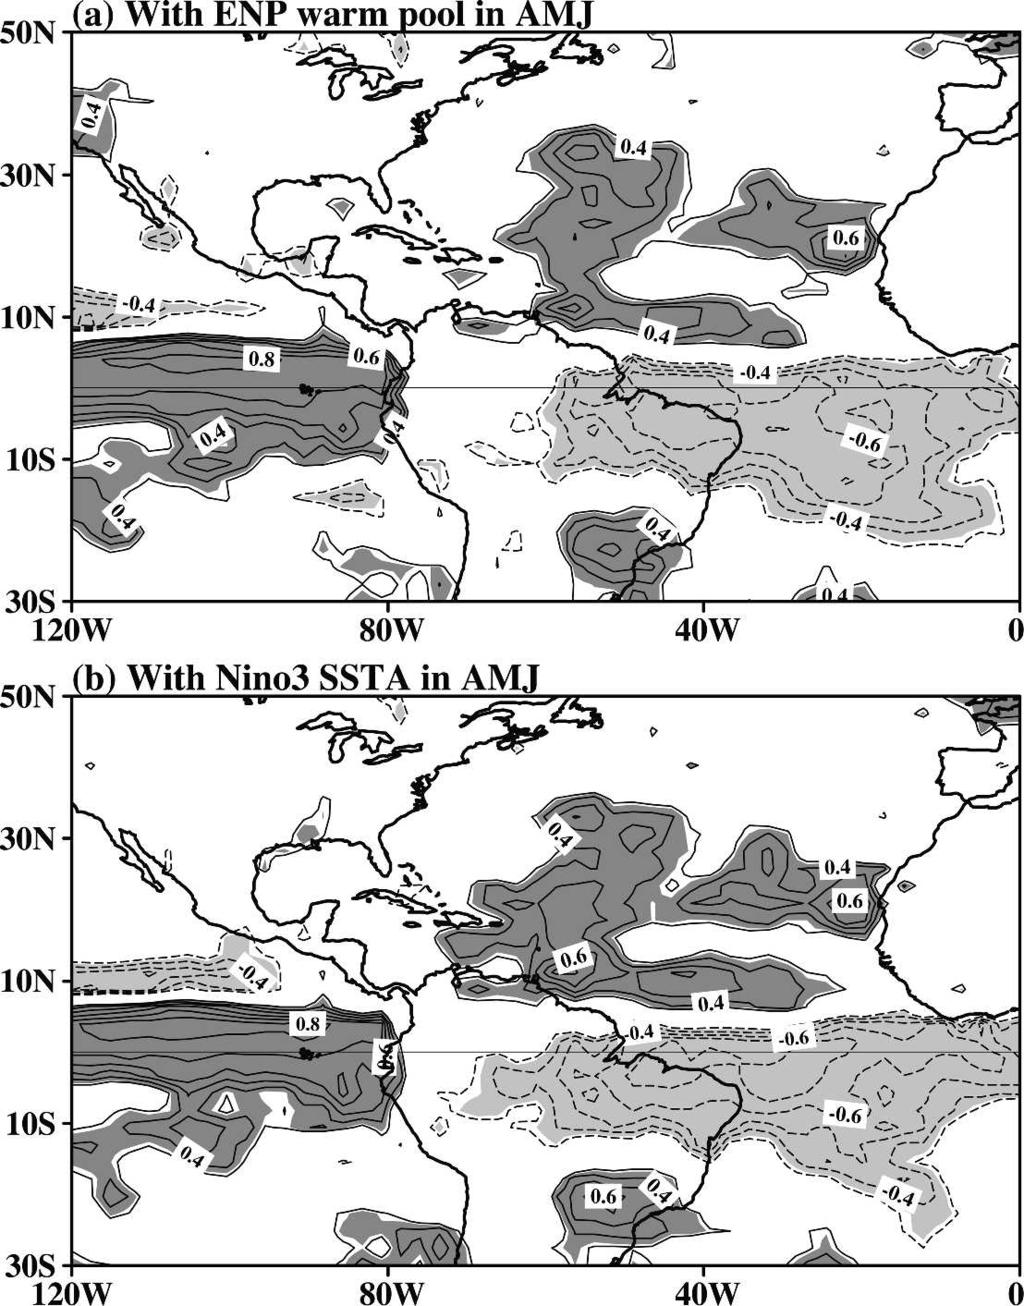 This correlation pattern is very similar to that of the AMJ rainfall anomalies with the AMJ Niño-3 SST anomalies, as shown in Fig. 5b.